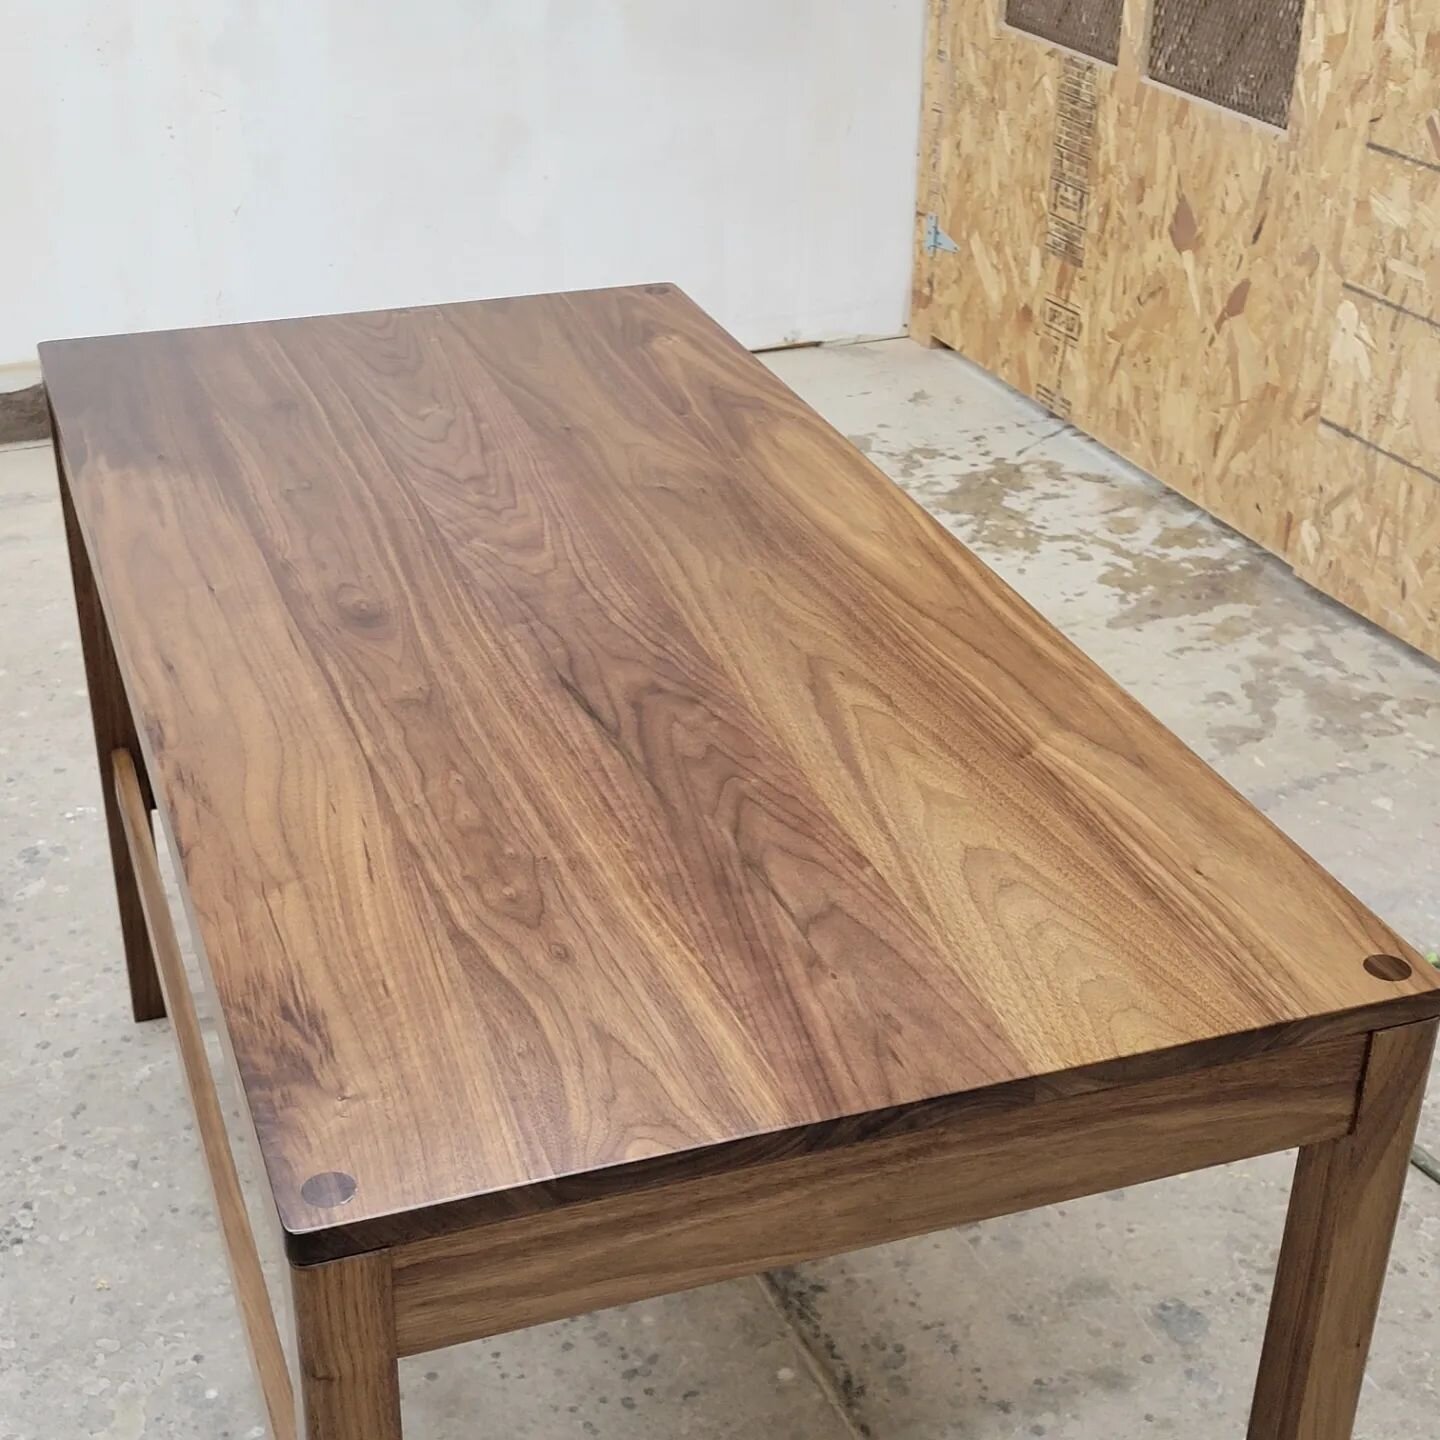 Walnut desk ready for delivery

 
#woodfurniture #handcrafted #madeinmilwaukee #walnut wood